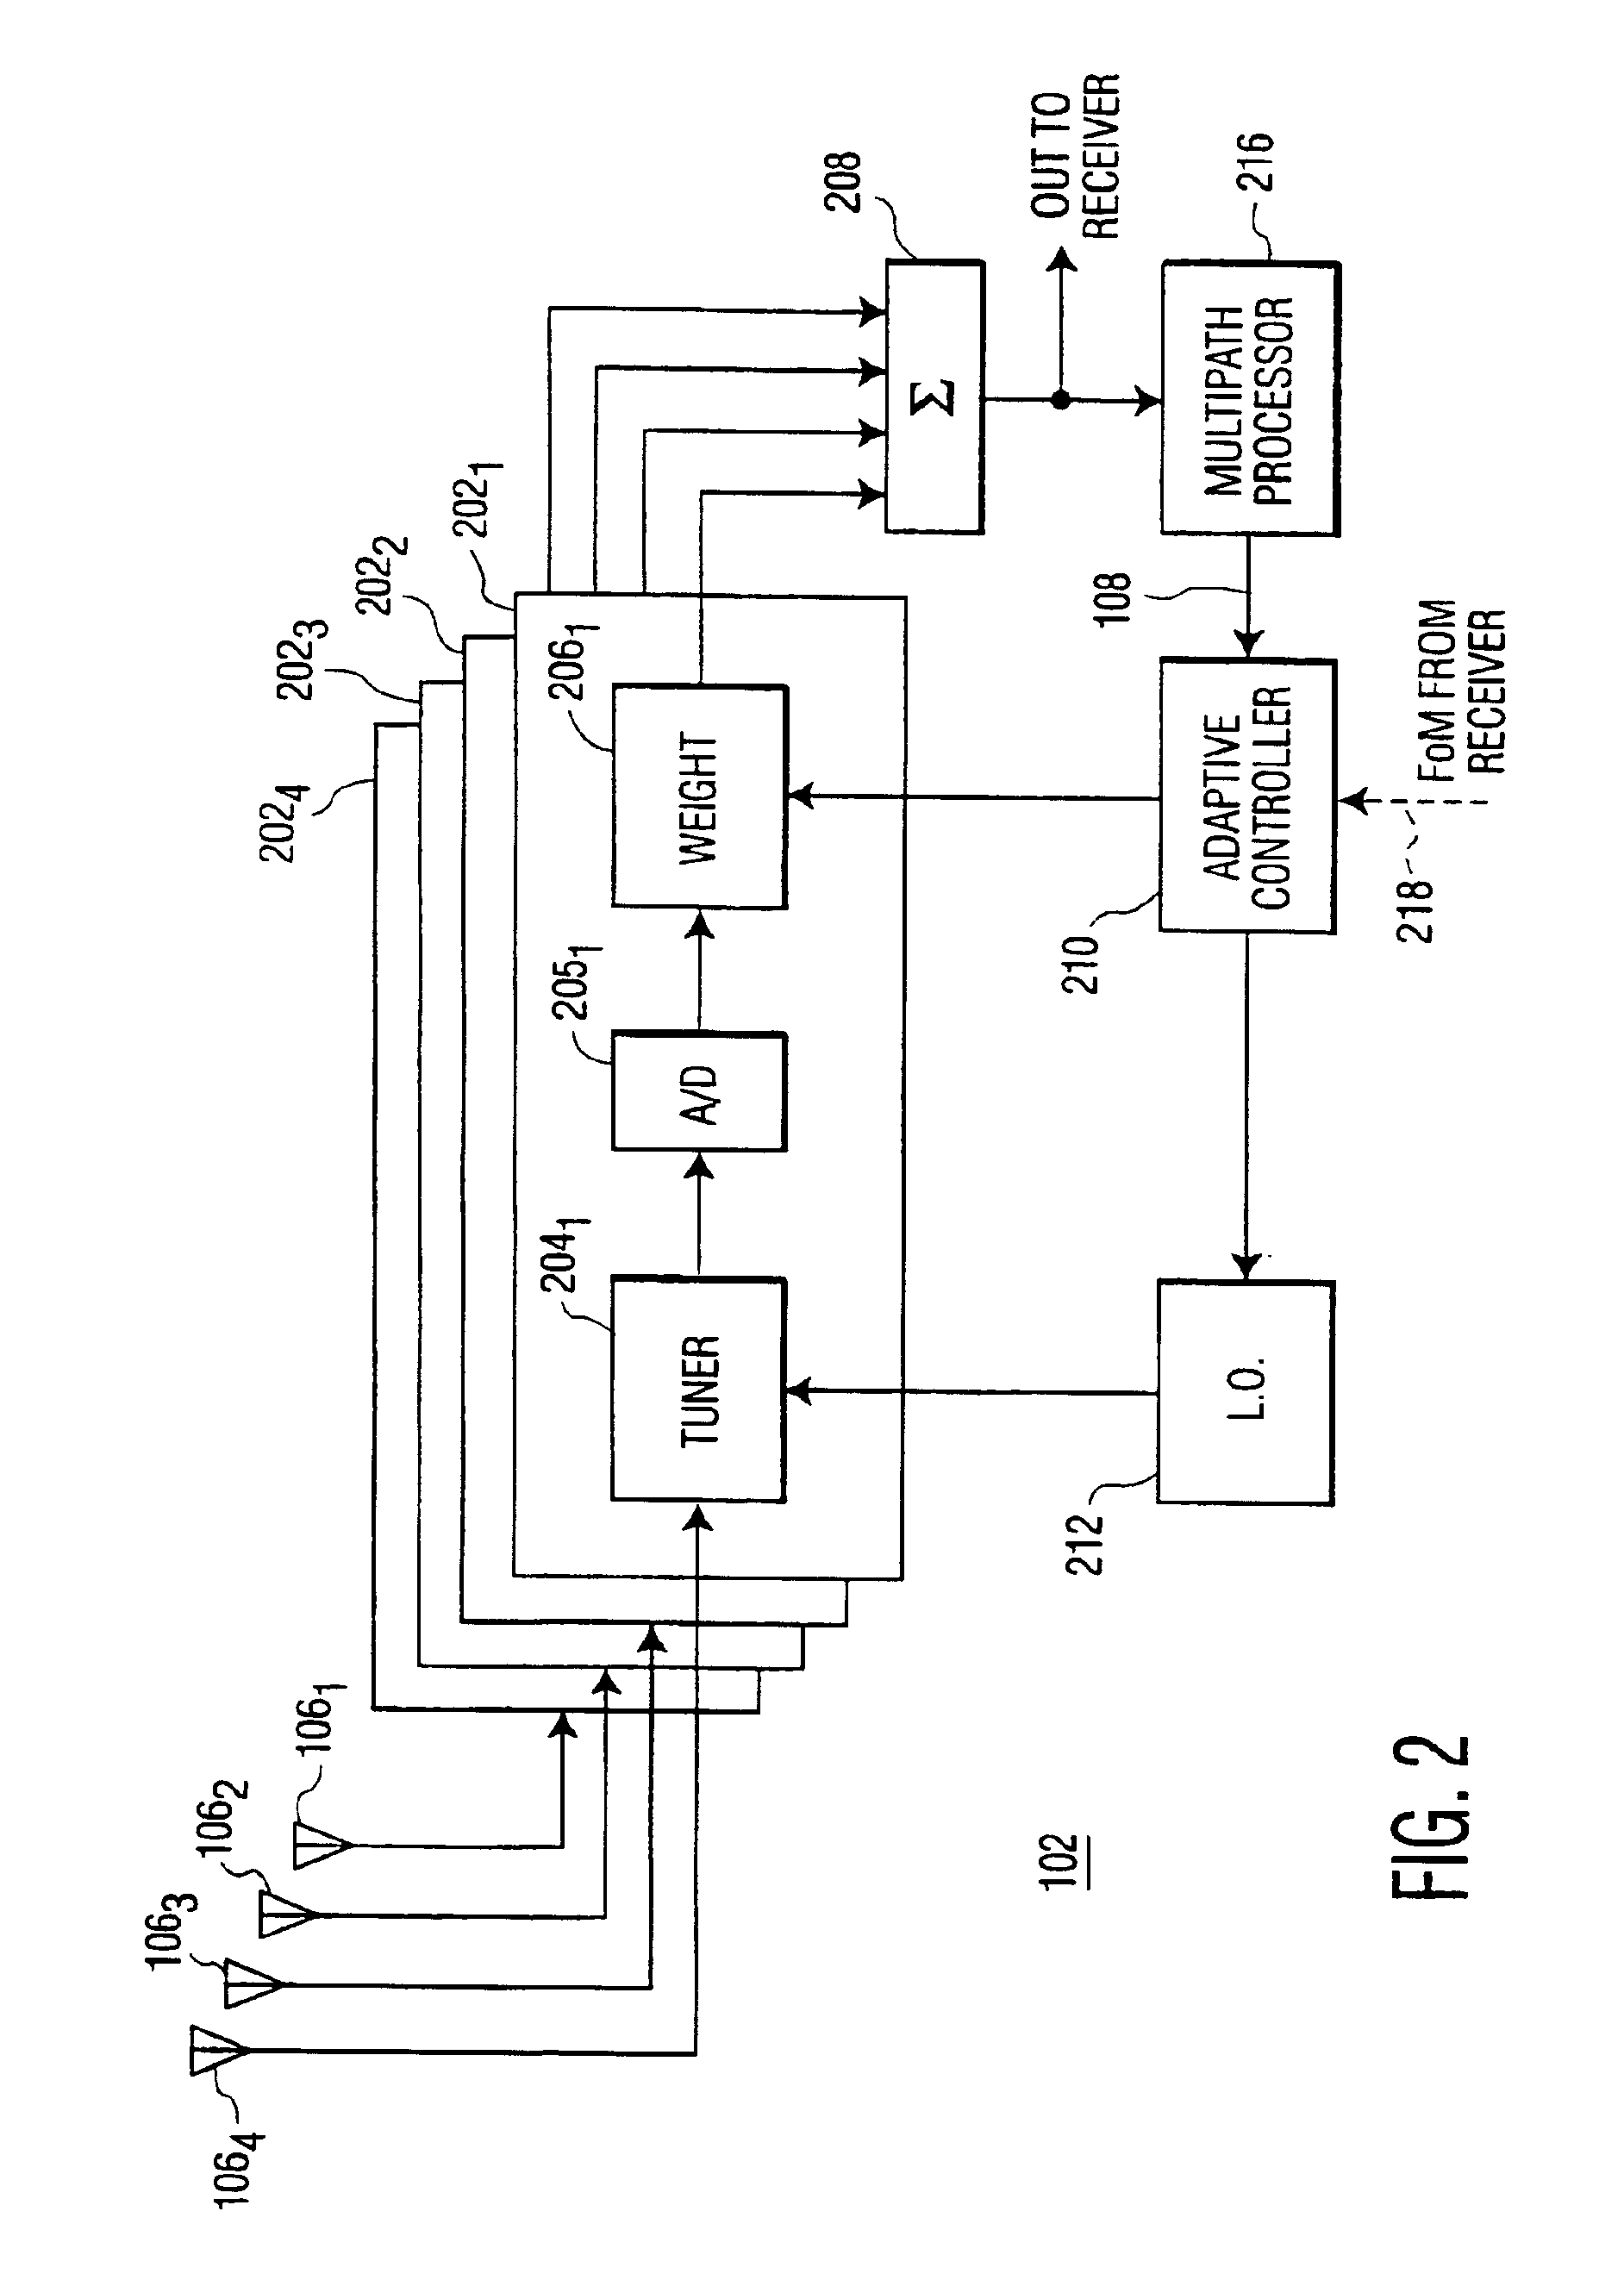 Method and apparatus for reducing multipath distortion in a television signal